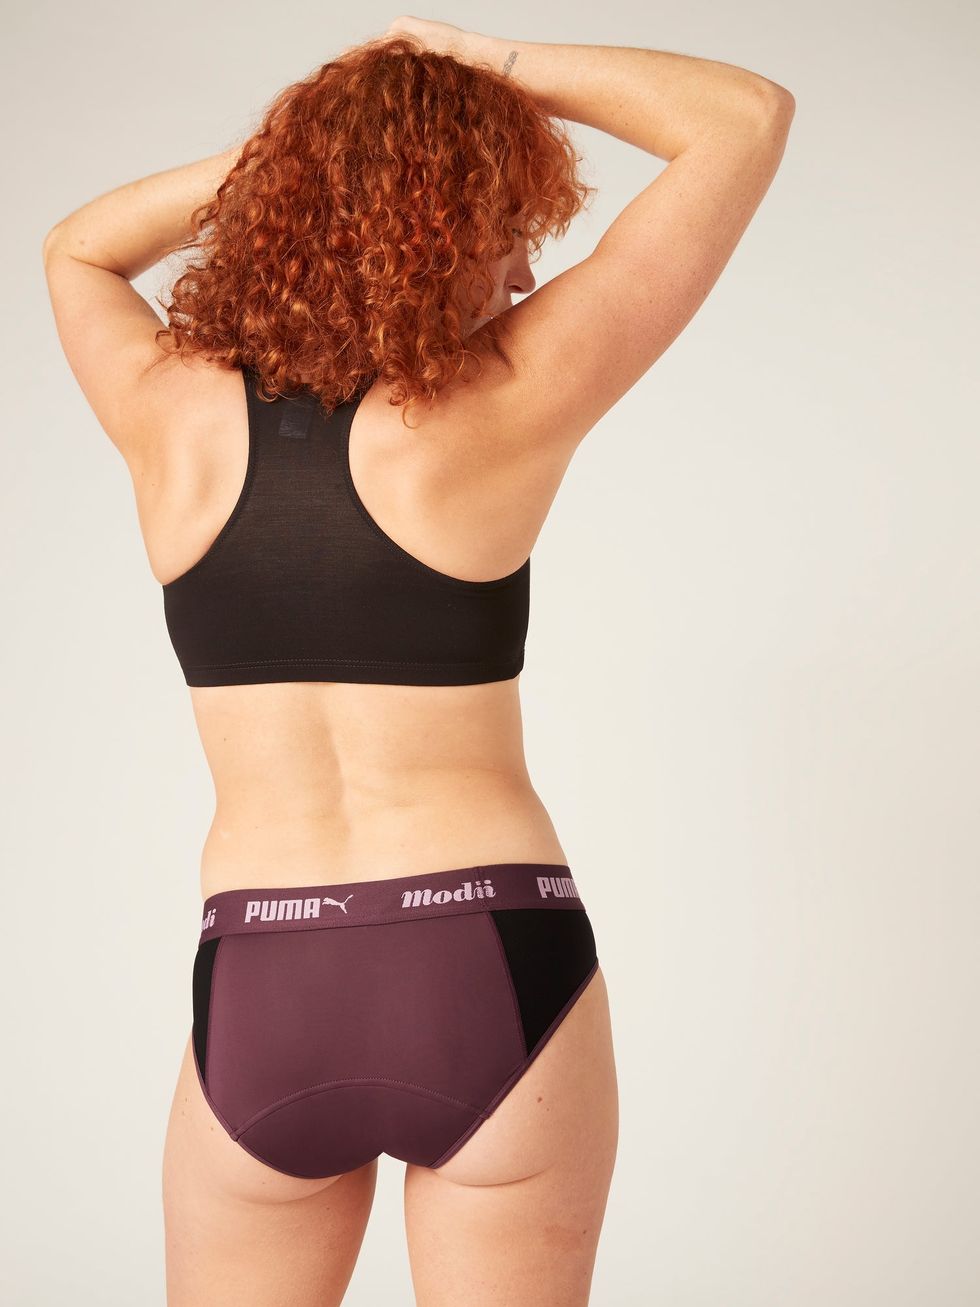 Best underwear for exercise to add to your kit in 2023